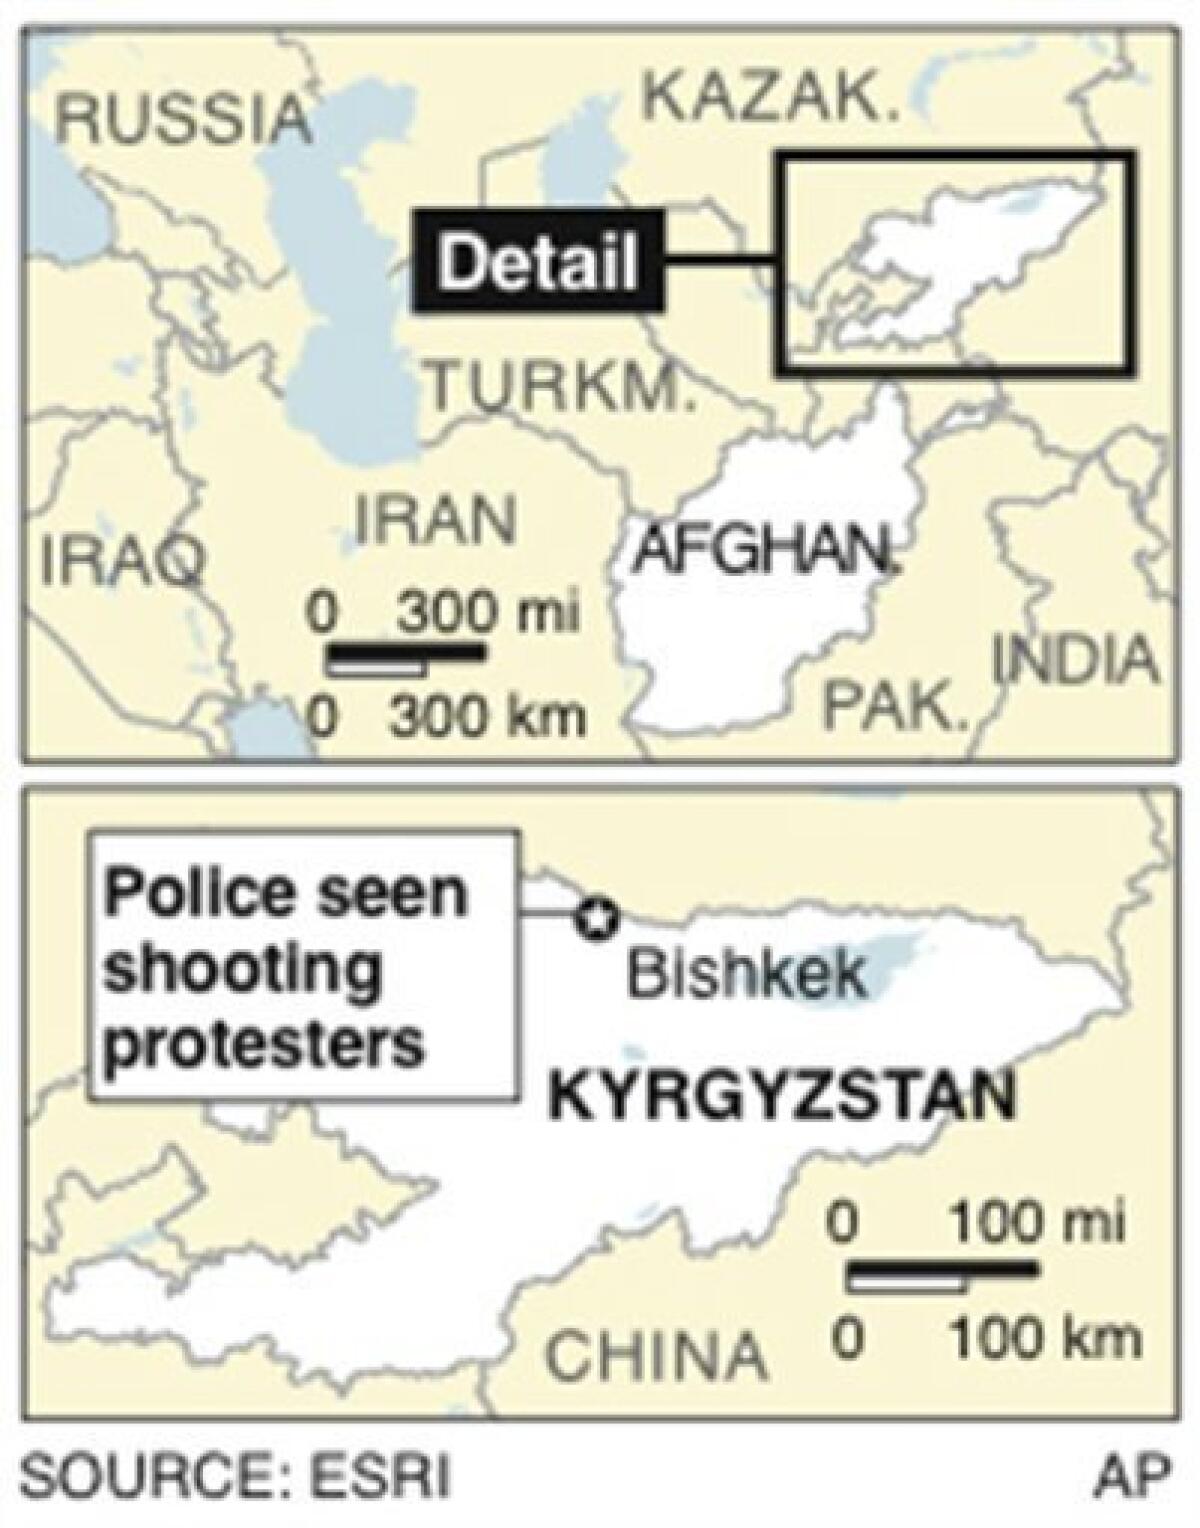 Map locates Bishkek, Kyrgyzstan, where police were seen shooting protesters angry over the arrests of opposition leaders